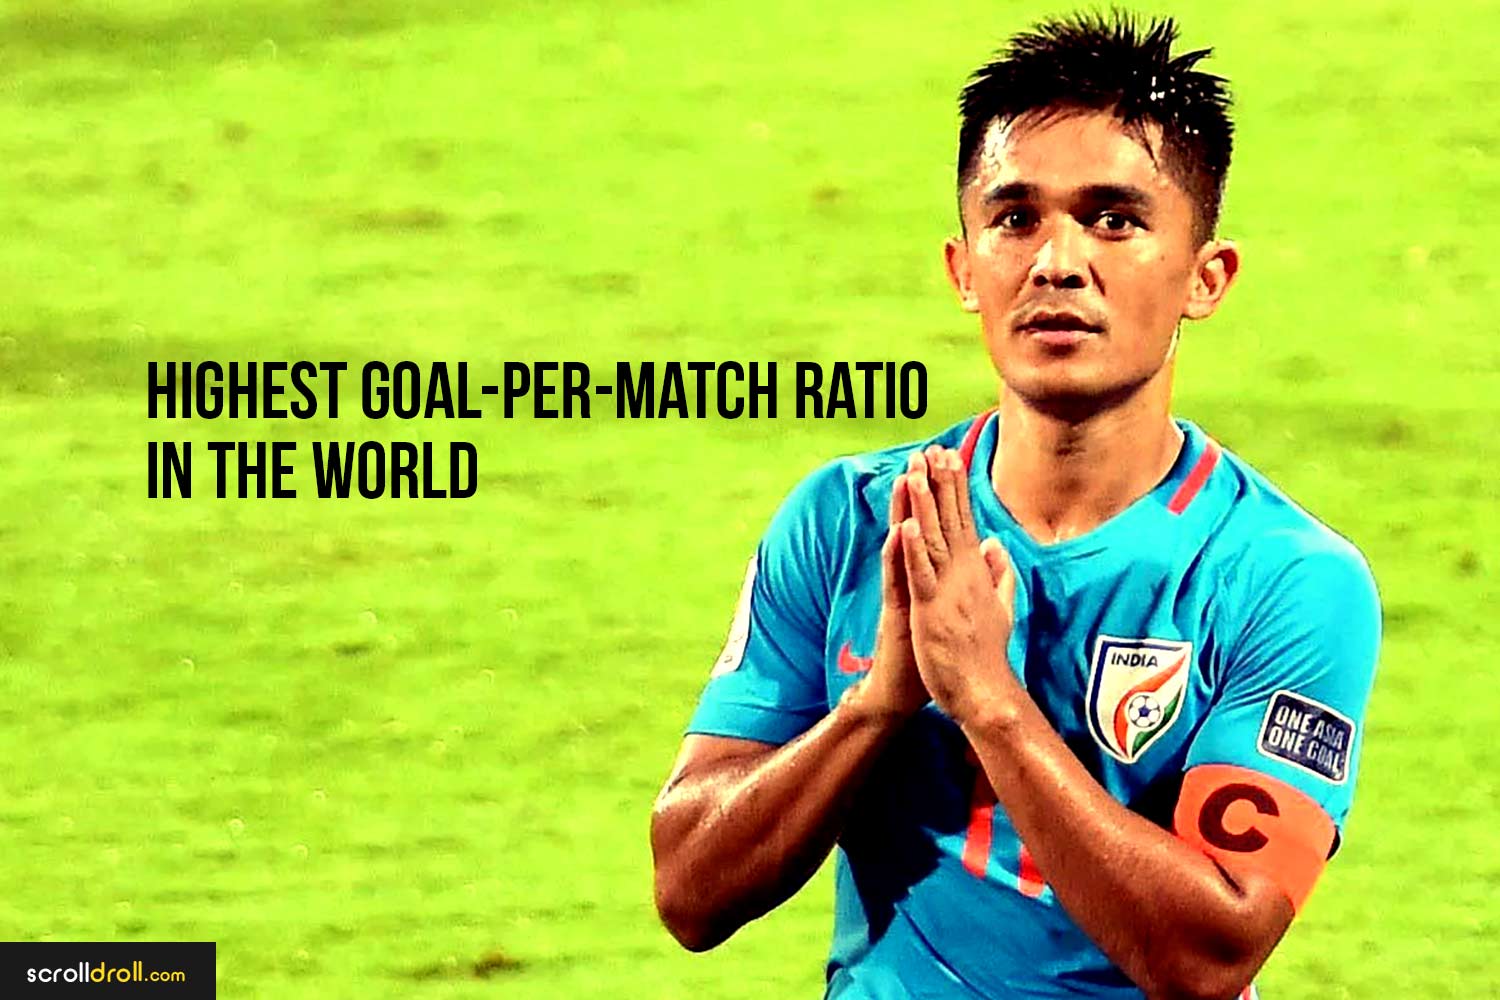 Sunil Chhetri 1 - Stories for the Youth!